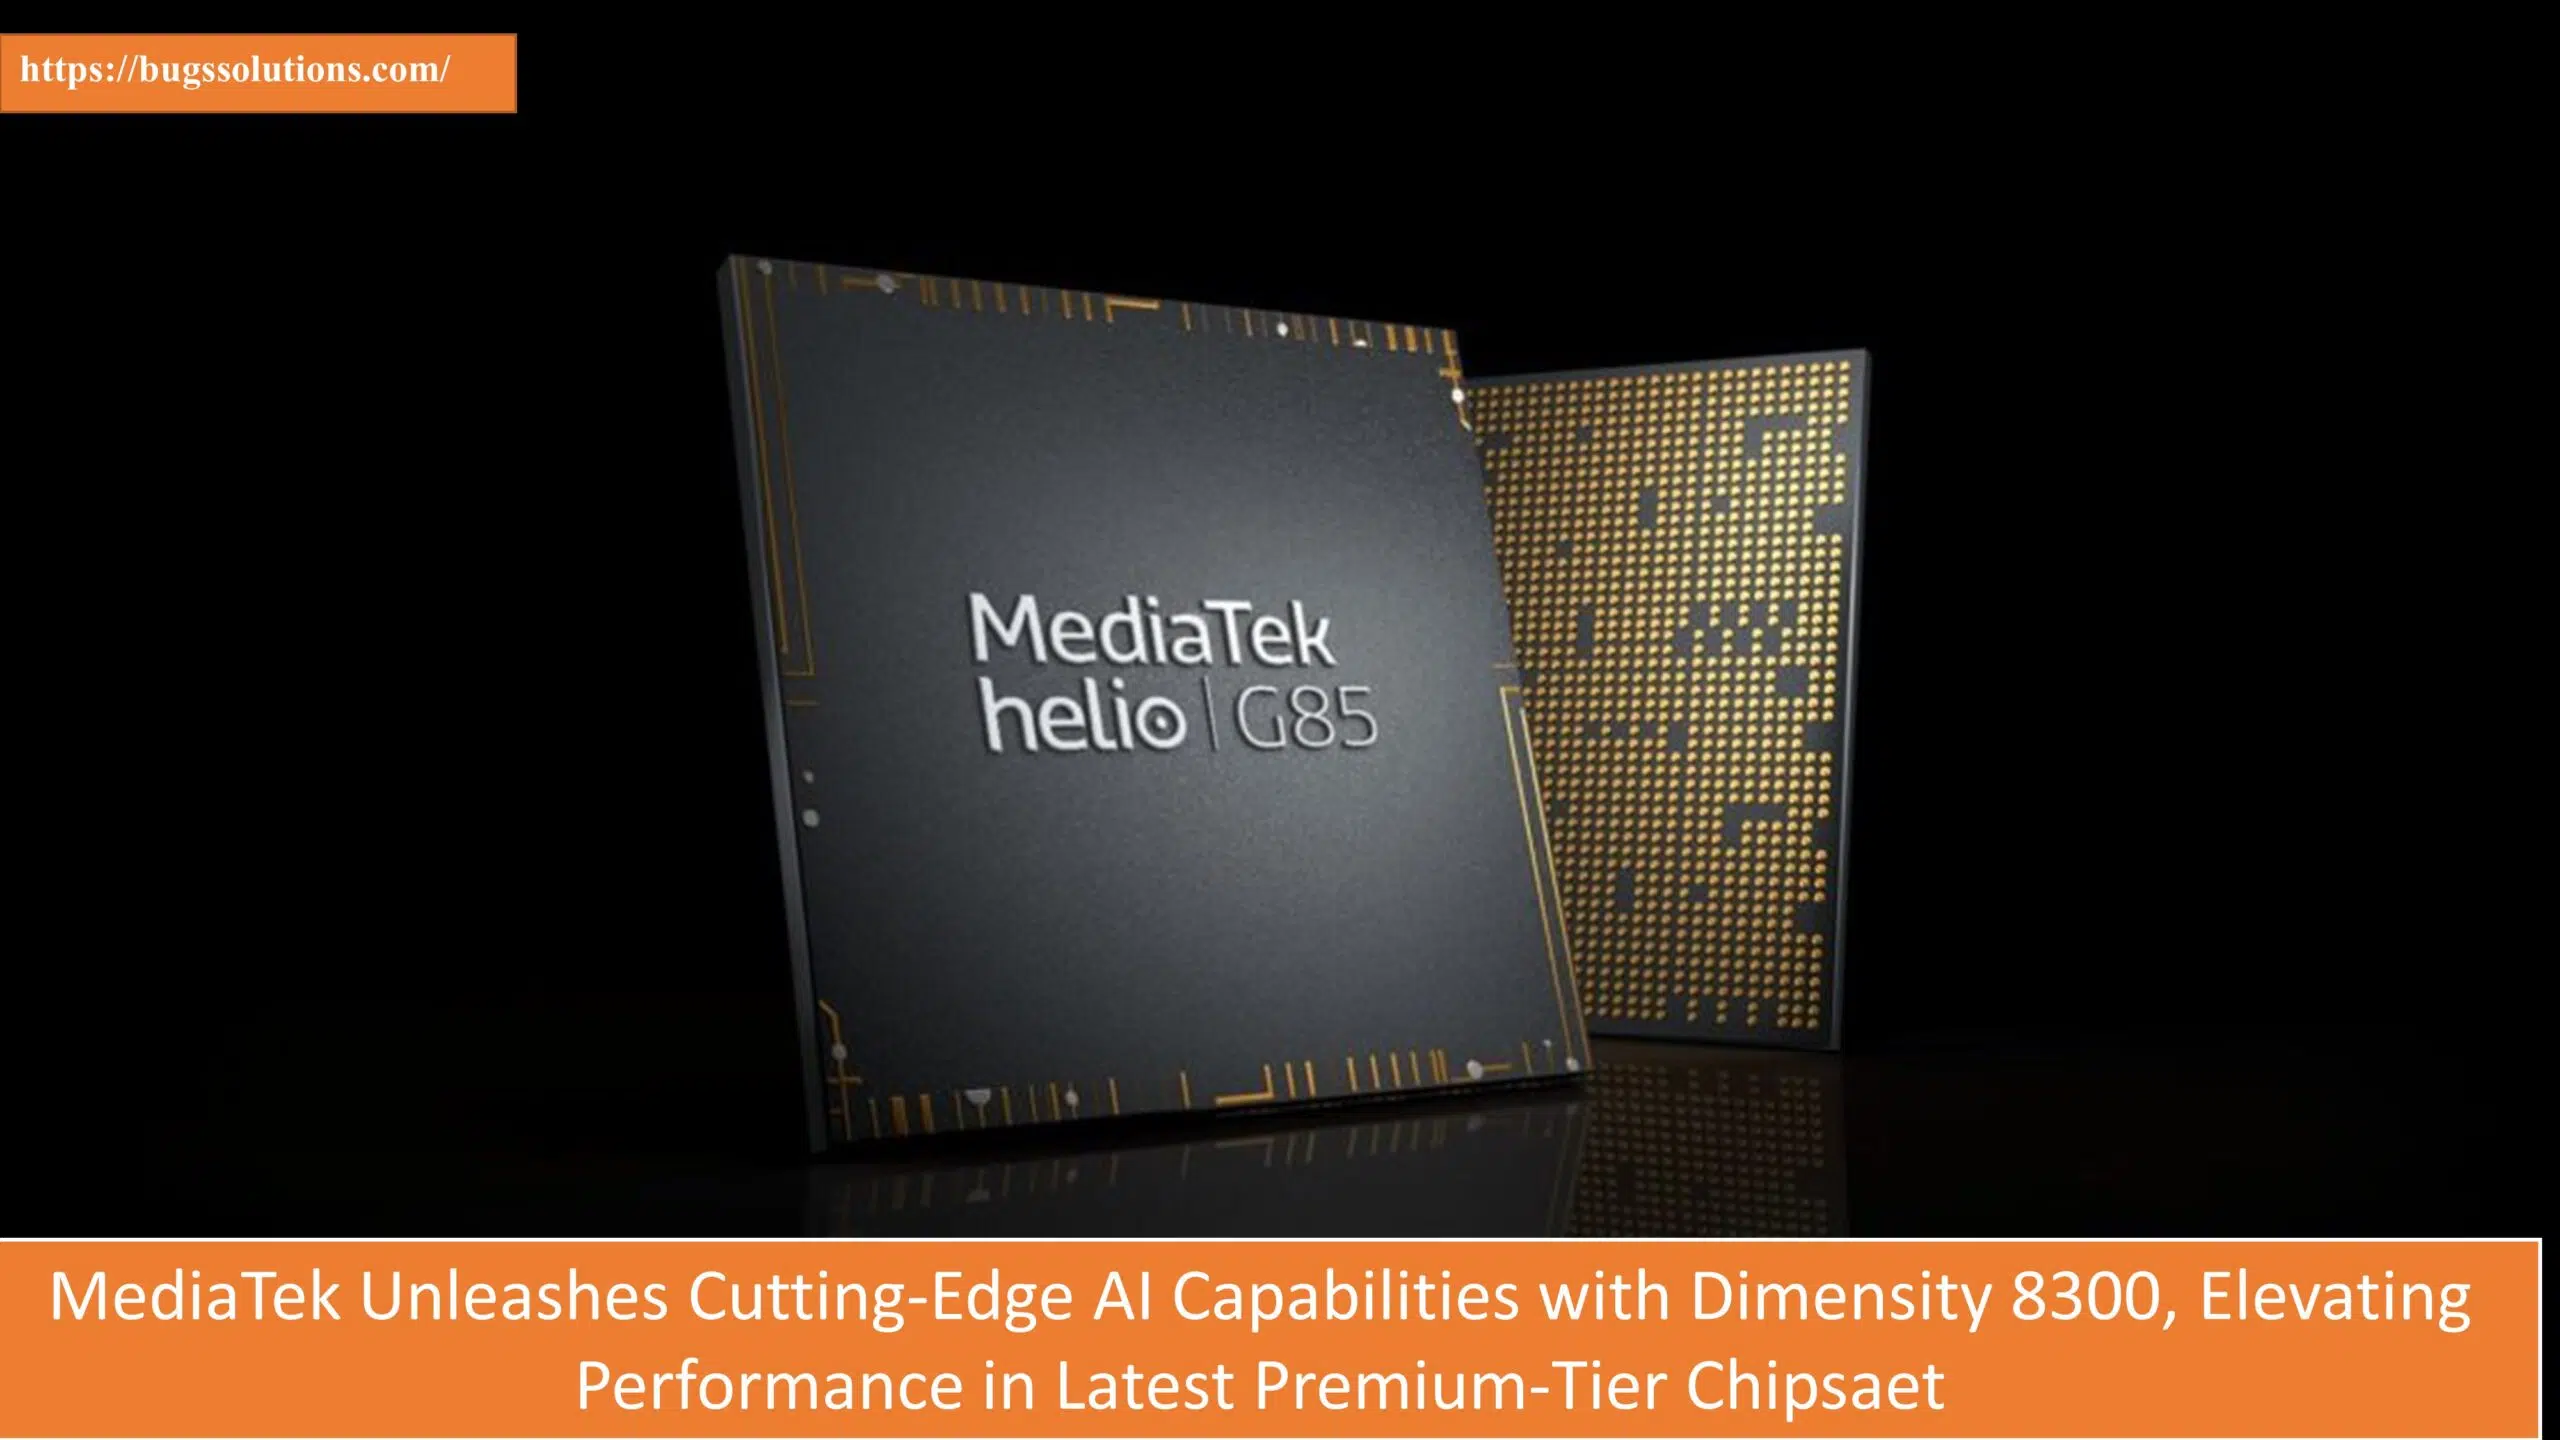 MediaTek Unleashes Cutting-Edge AI Capabilities with Dimensity 8300, Elevating Performance in Latest Premium-Tier Chipsaet